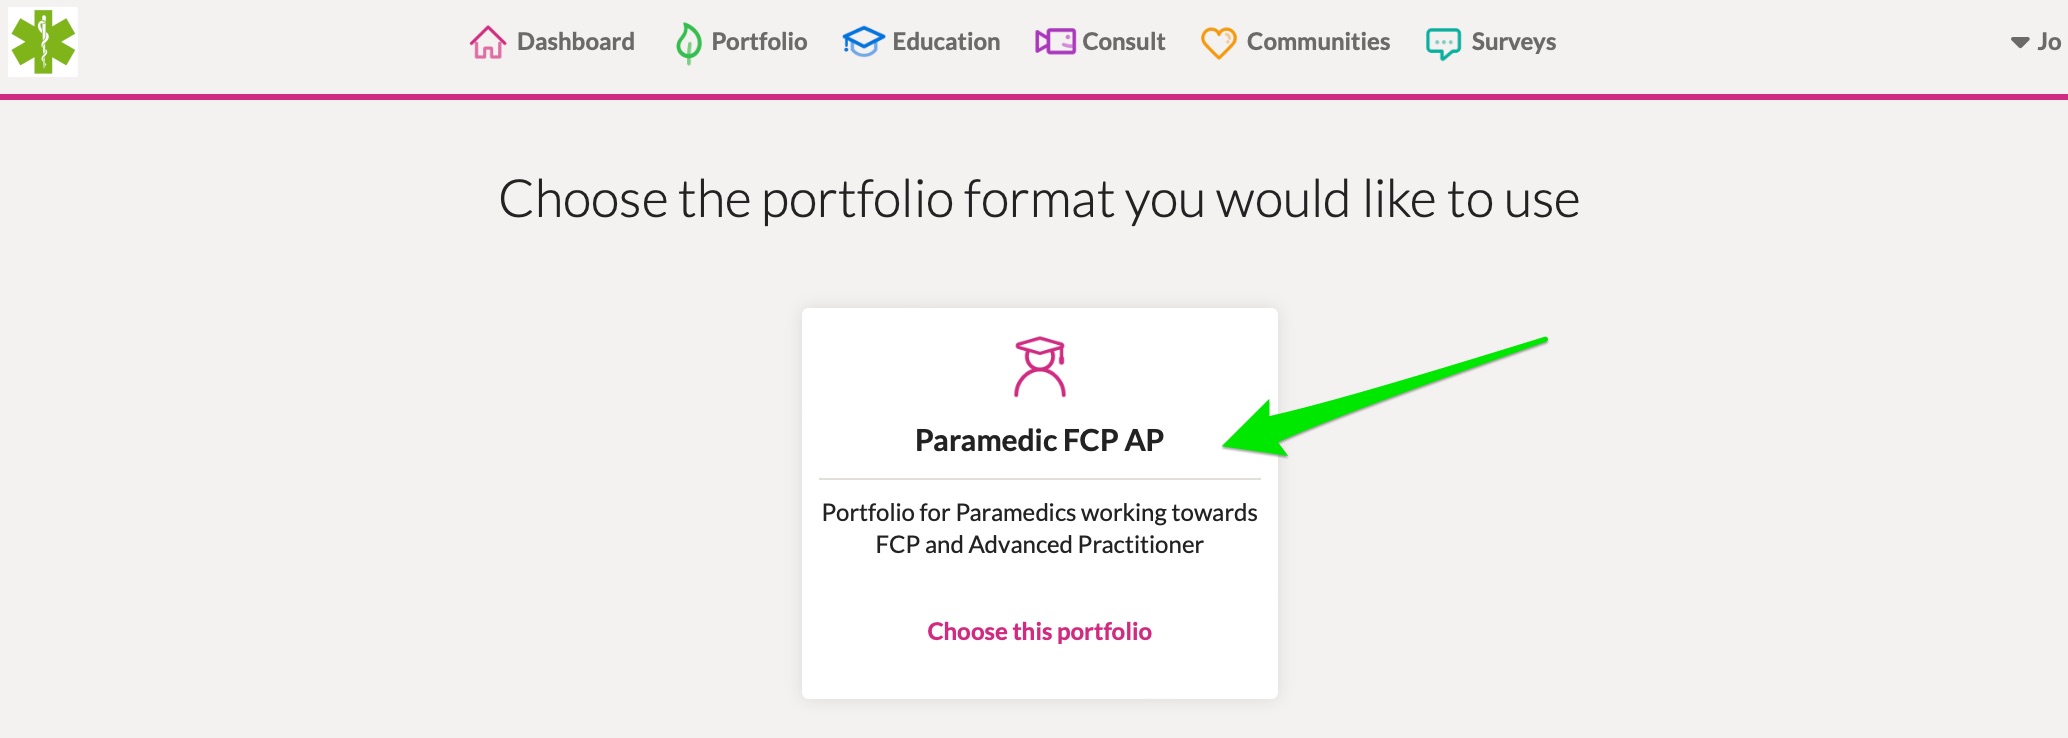 Choose_the_portfolio_format_you_would_like_to_use_-_FourteenFish.png